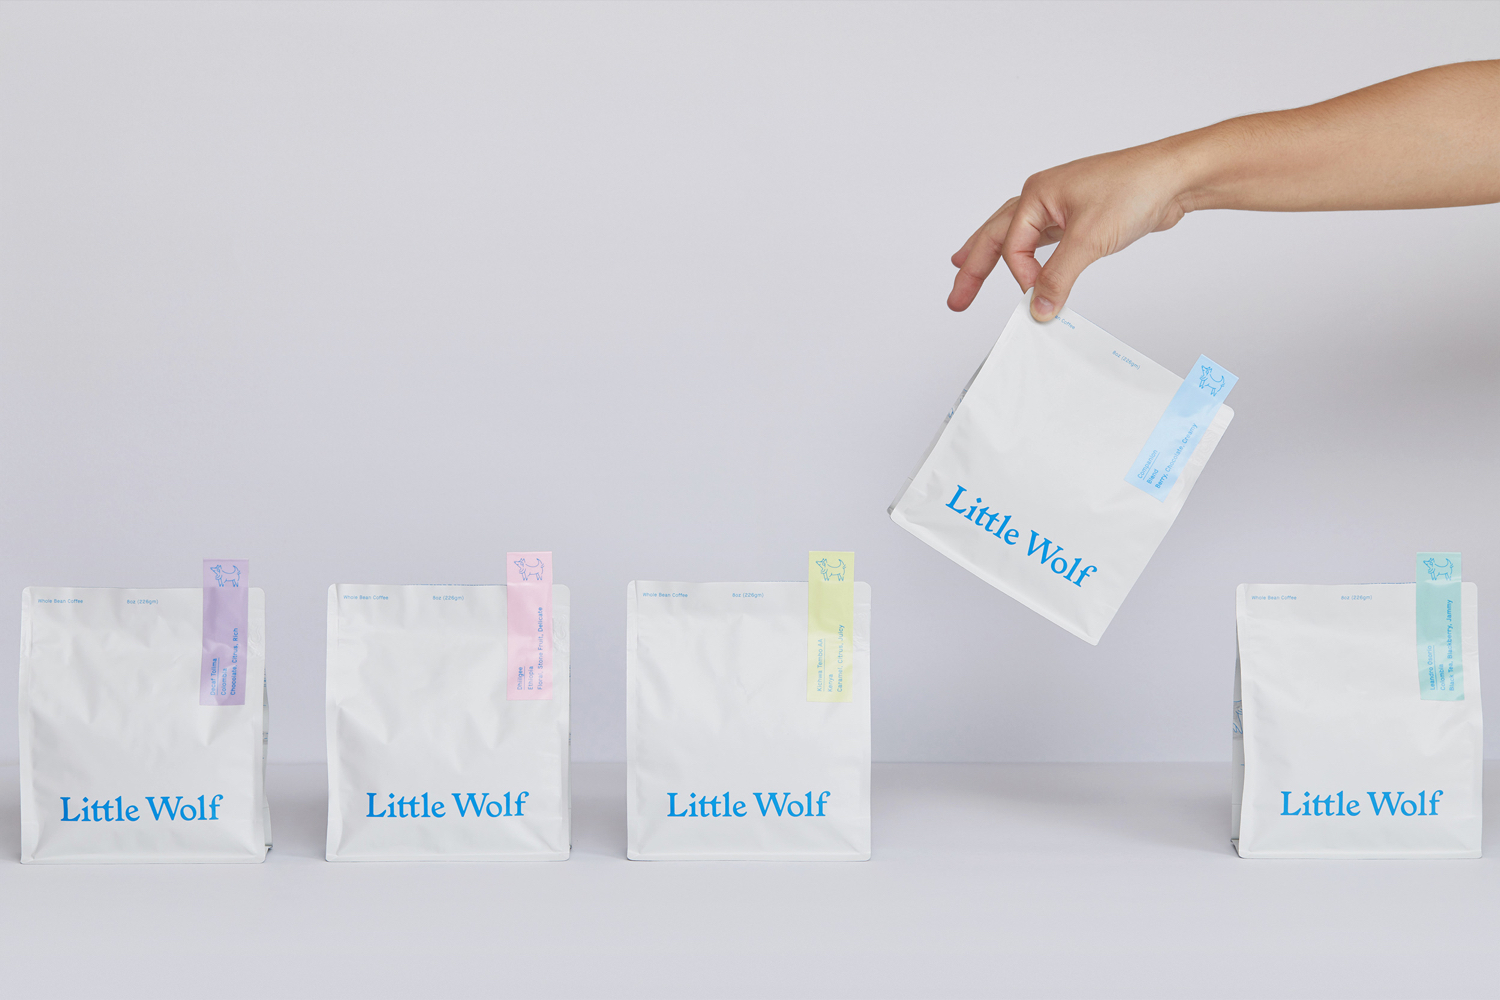 New Branding & Packaging for Little Wolf by Perky Bros — BP&O